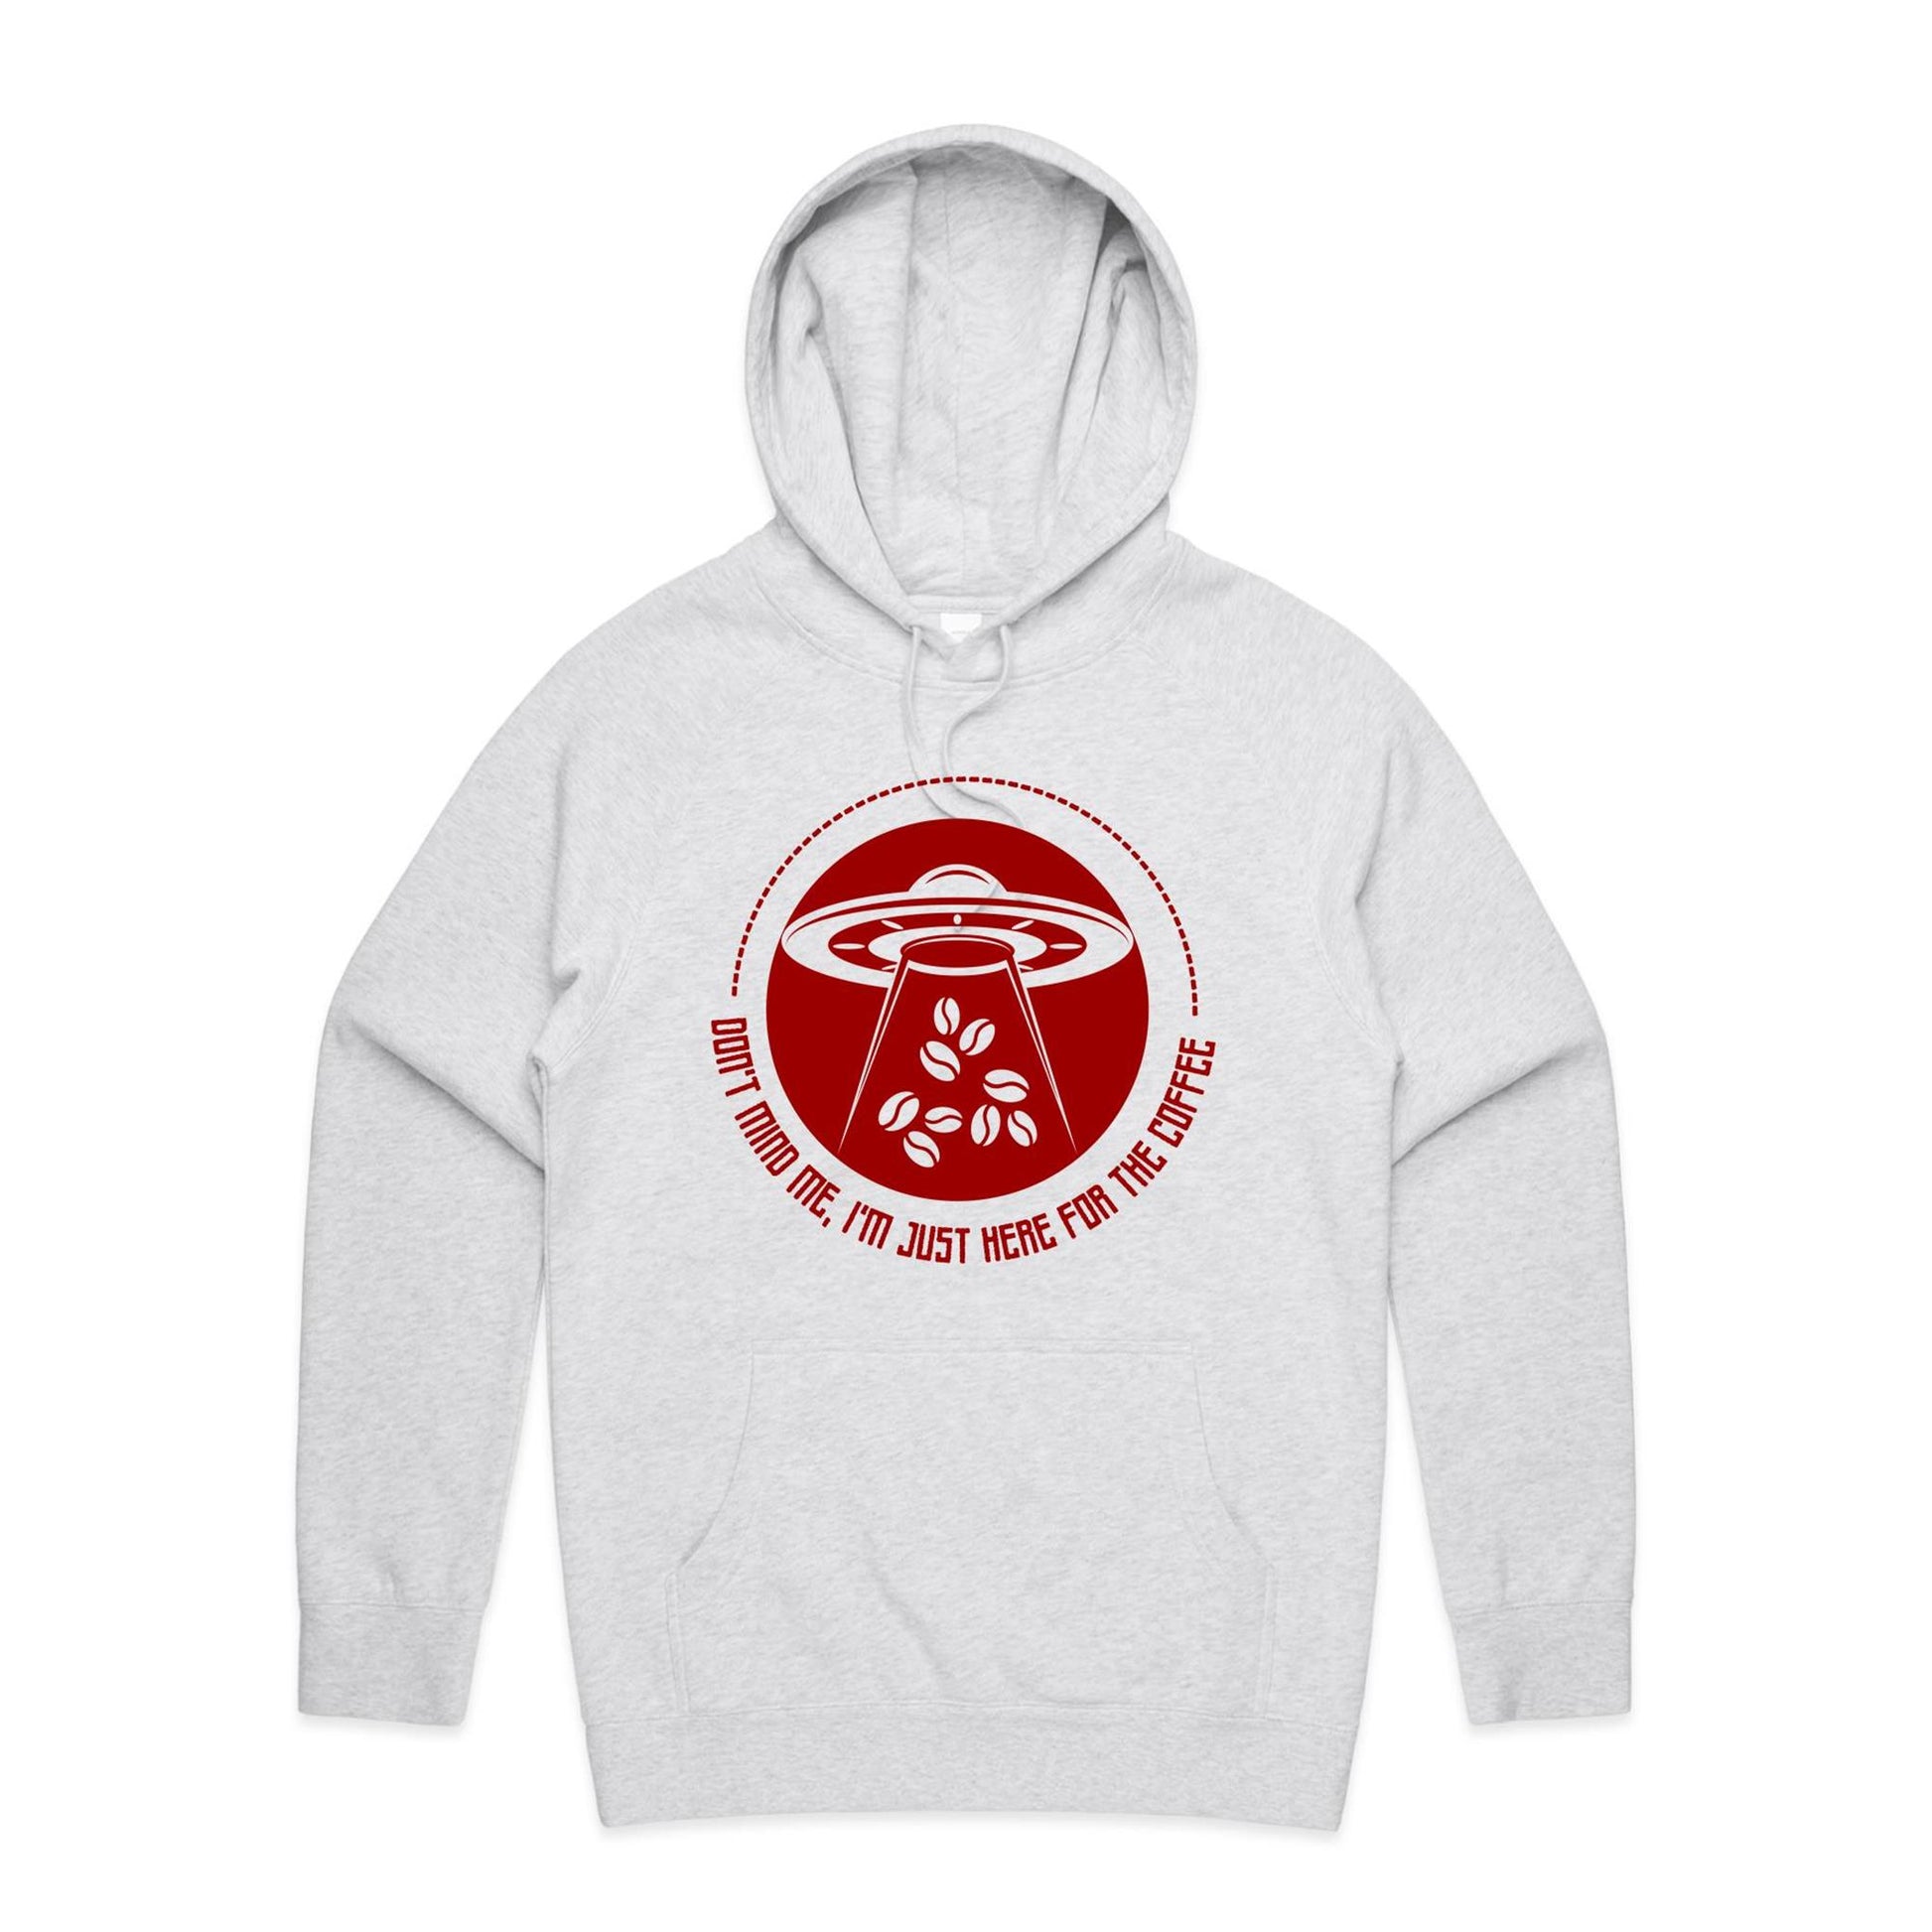 Don't Mind Me, I'm Just Here For The Coffee, Alien UFO - Supply Hood White Marle Mens Supply Hoodie Coffee Sci Fi